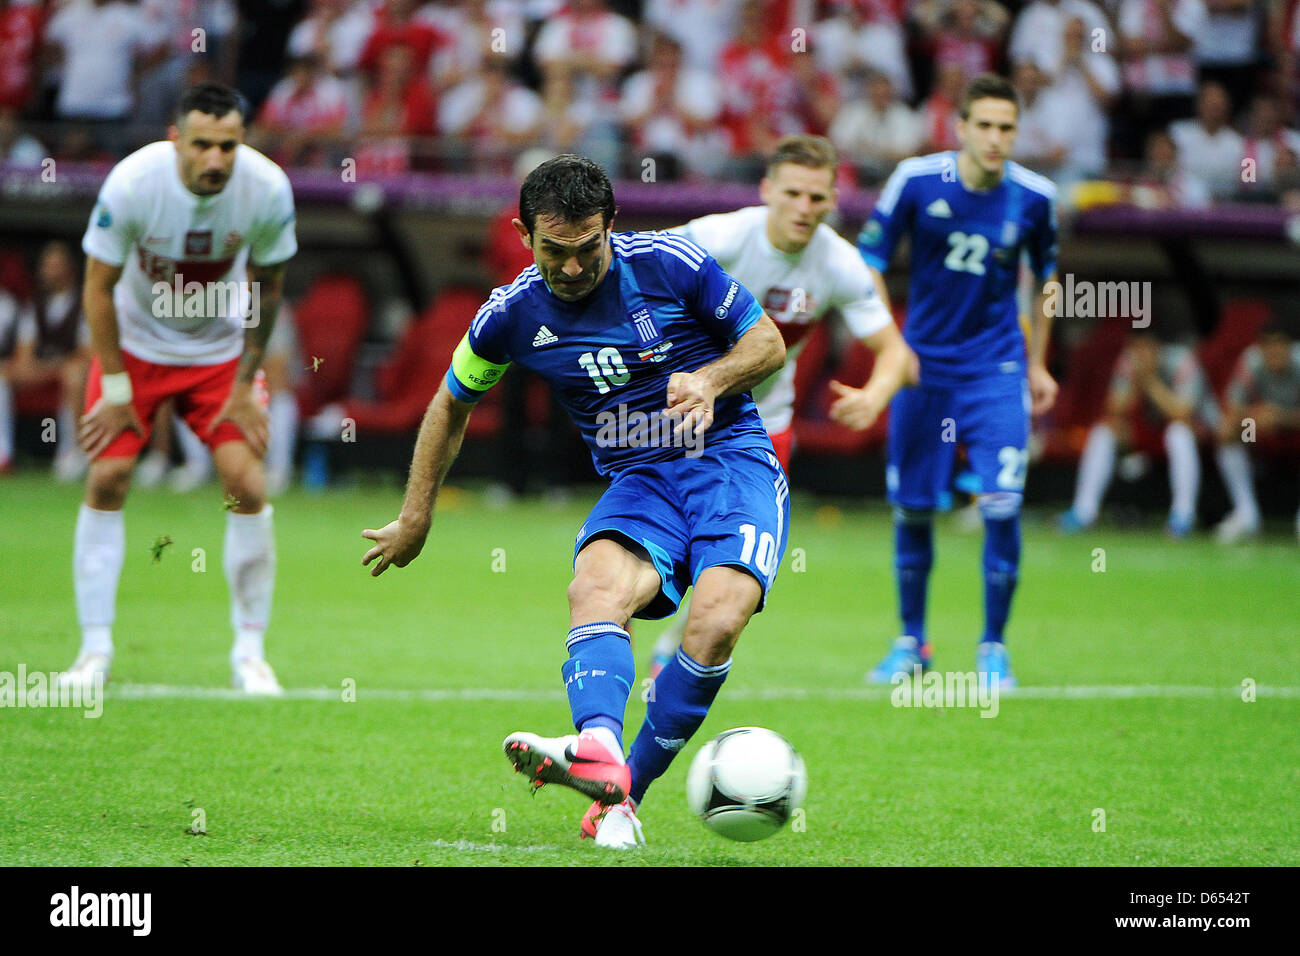 Greece's Giorgos Karagounis performs a penalty kick during the UEFA Euro 2012 match between Poland and Greece at the national stadium in Warsaw, Poland, 08 June 2012. Photo: Pressfocus / Revierfoto Stock Photo